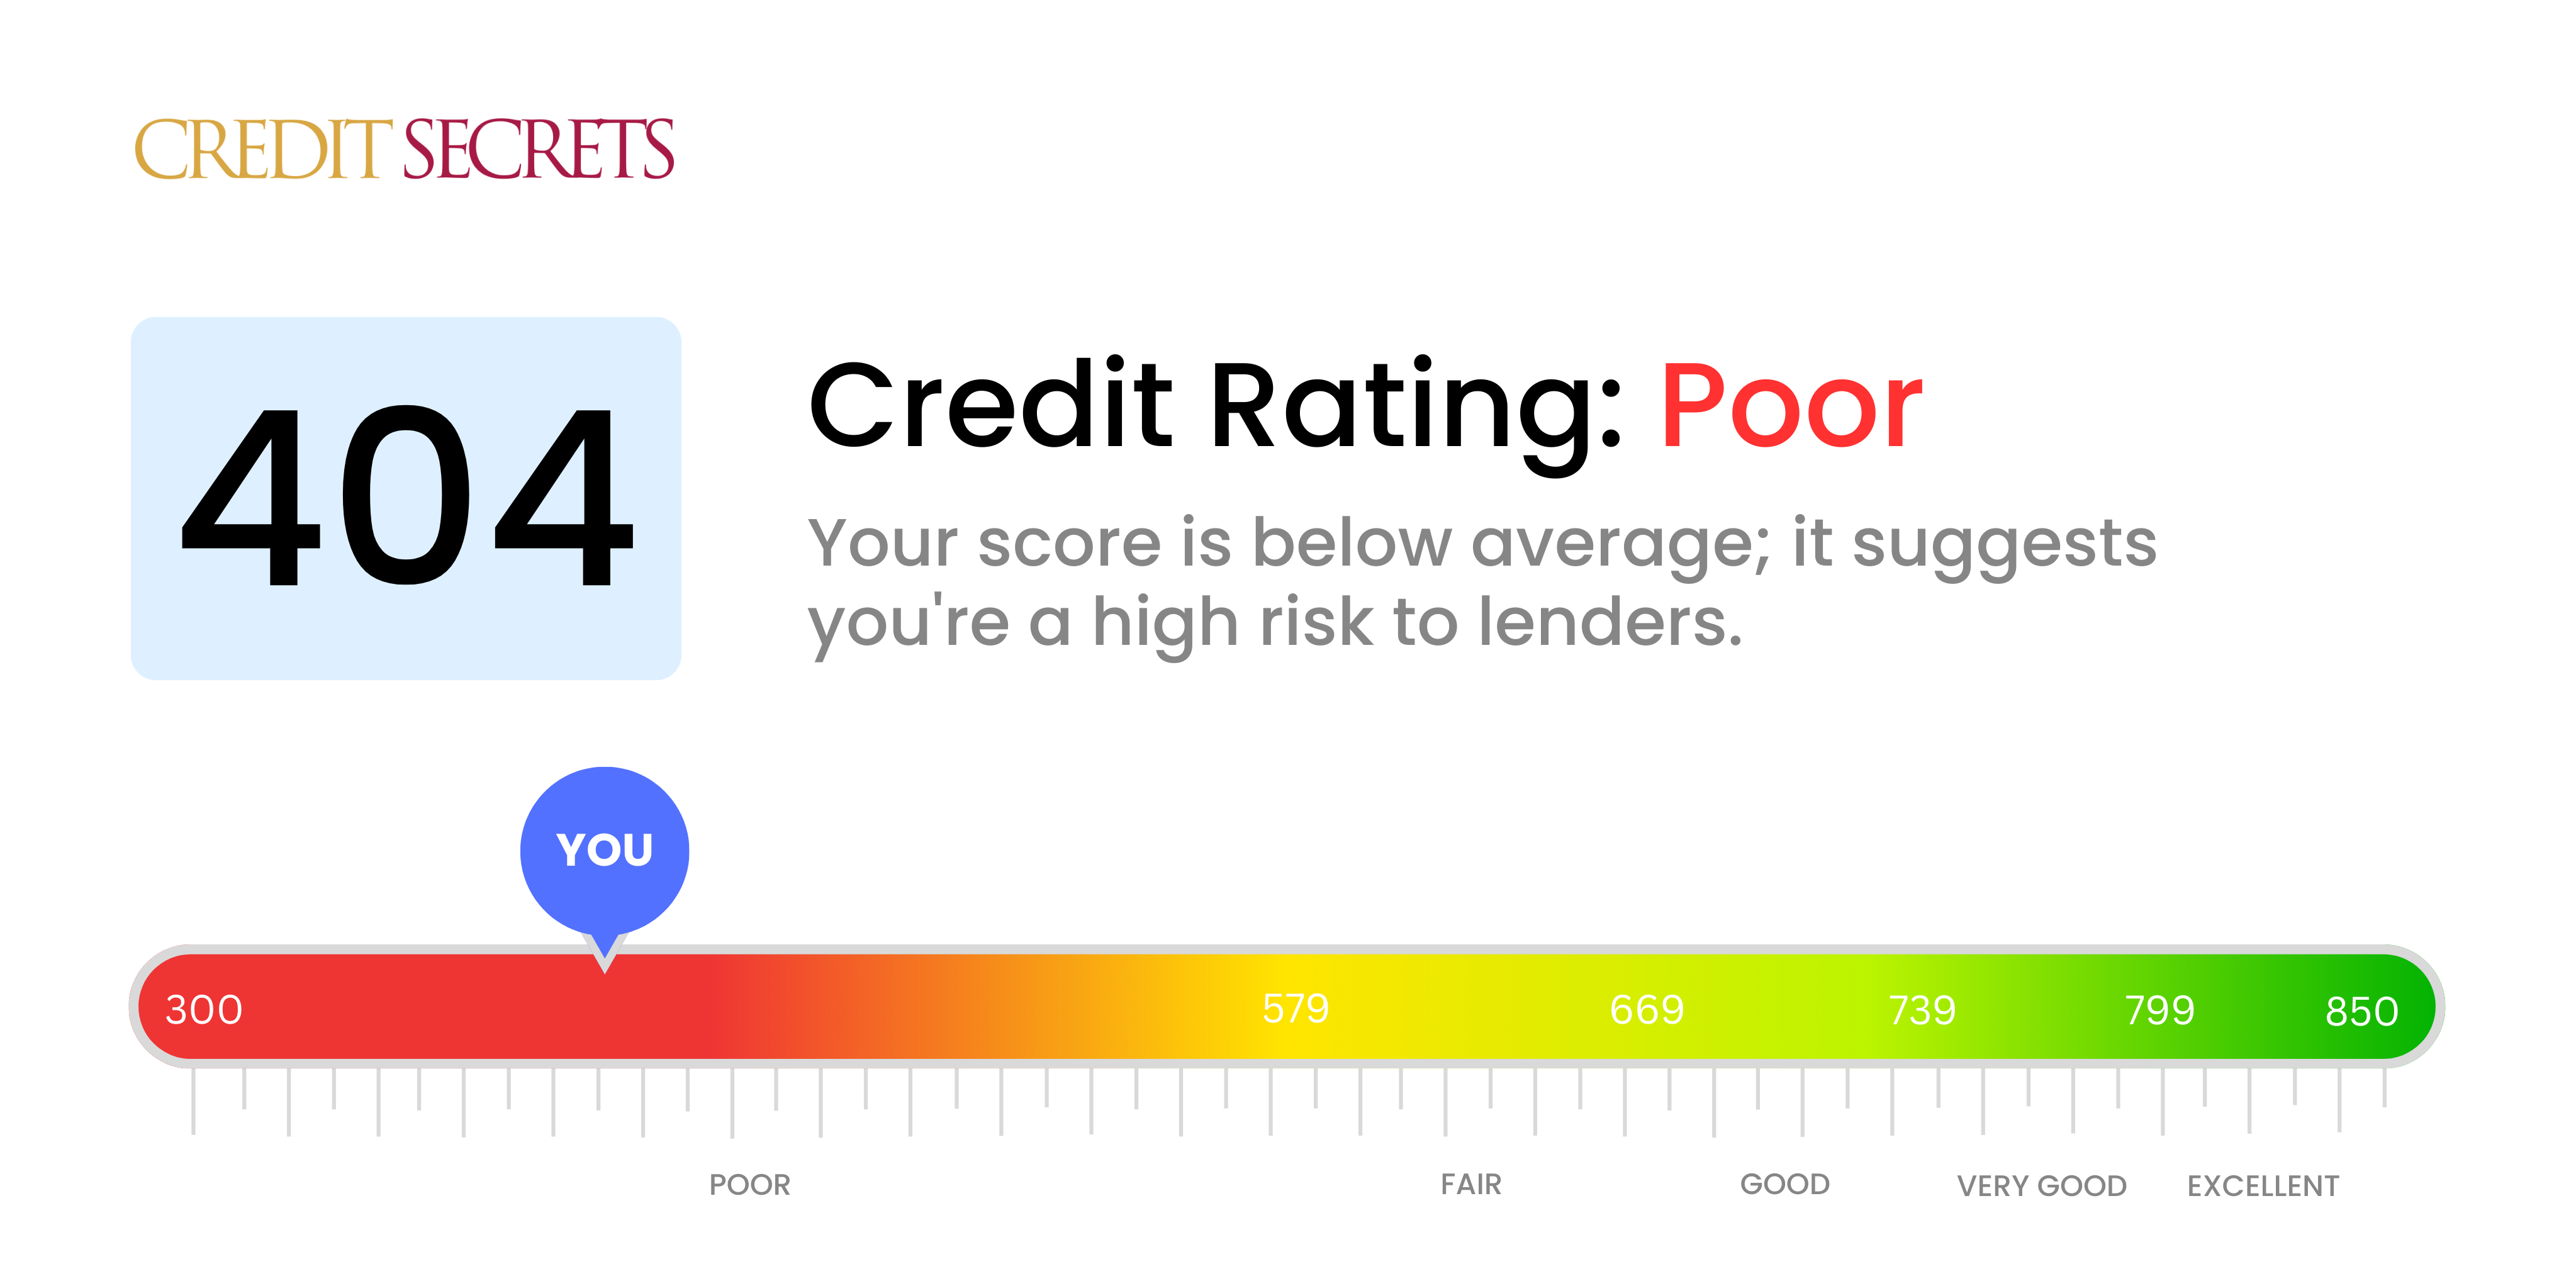 Is 404 a good credit score?